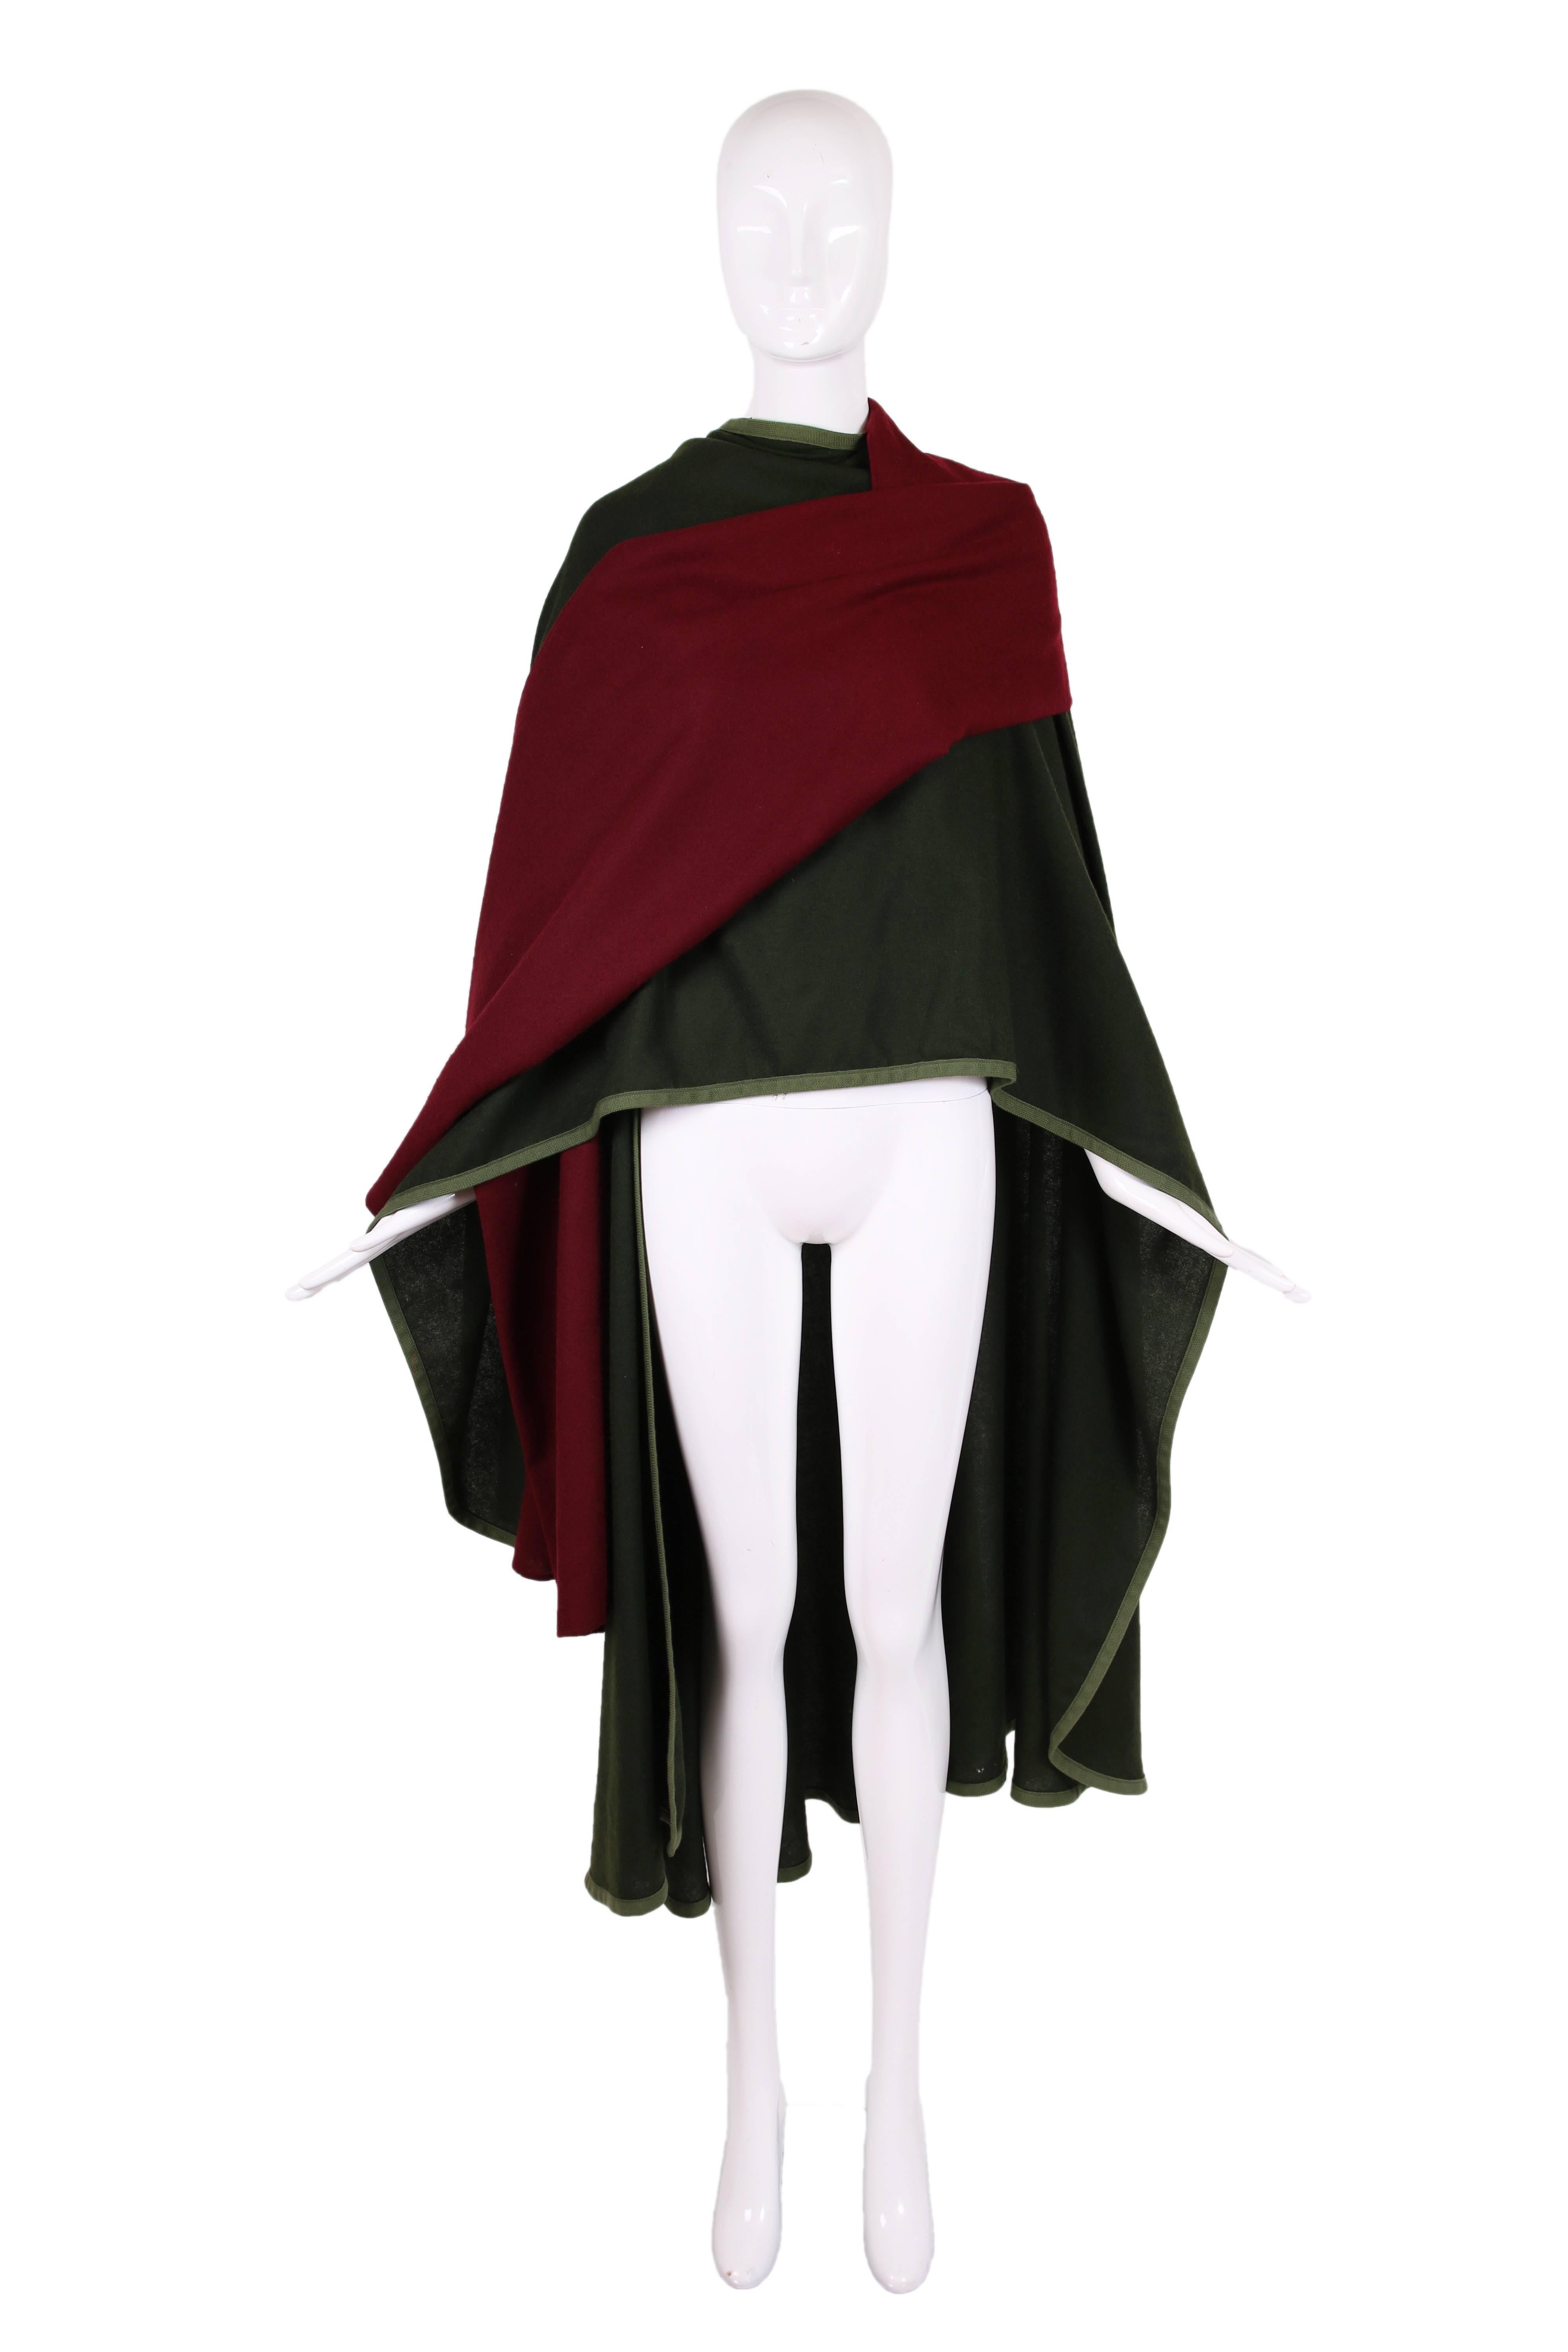 1970's Yves Saint Laurent YSL hunter green & burgundy wool cape with light green wool trim. The cape is constructed from a piece of green wool that folds over the shoulders, forming a panel down either side of the body front. Attached at the